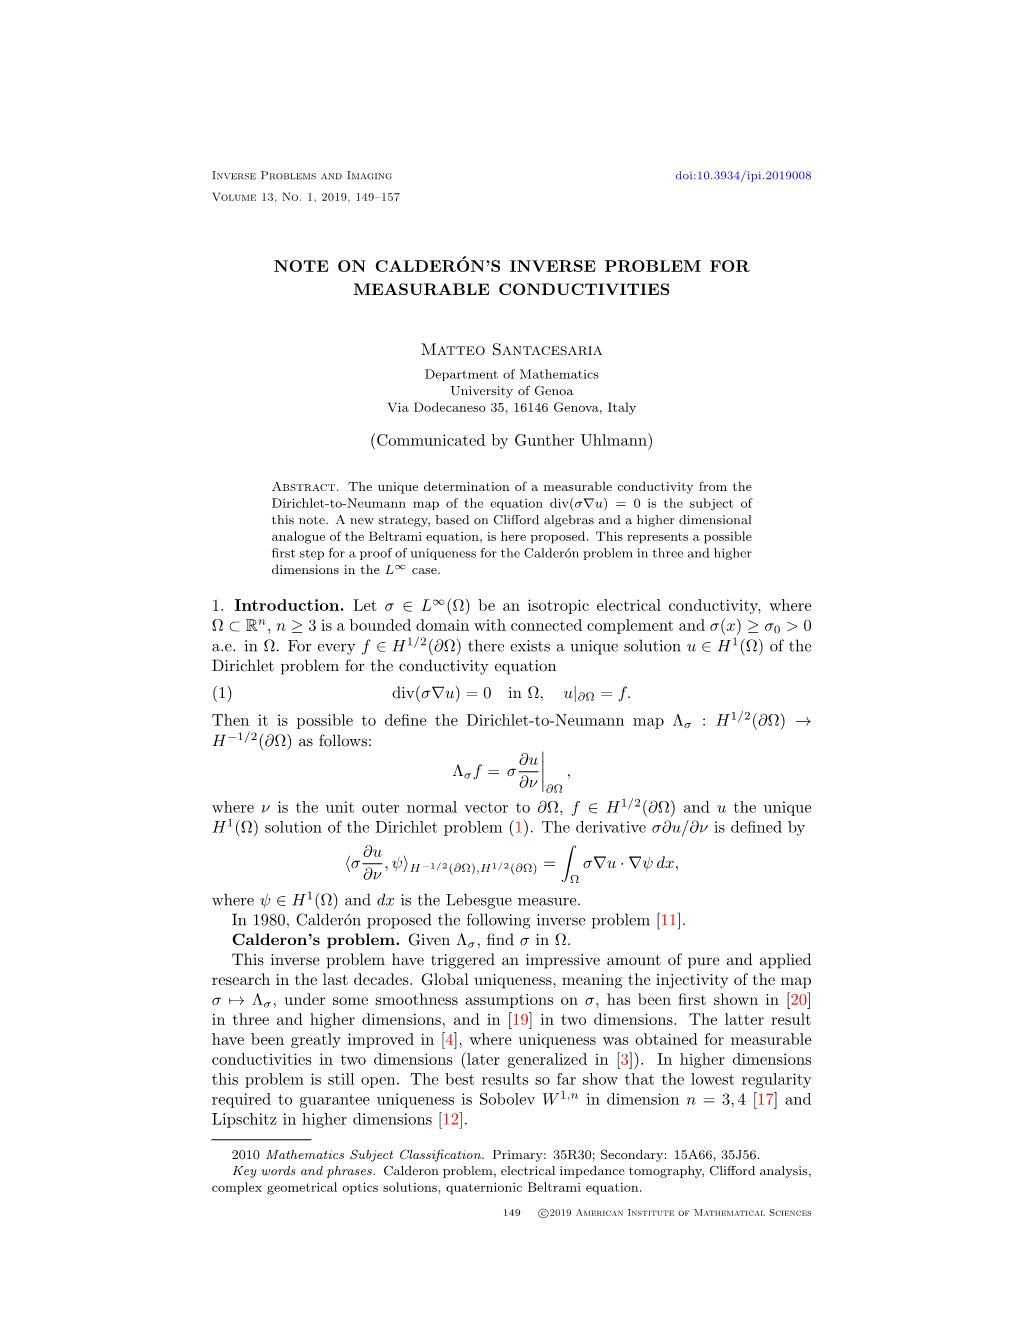 NOTE on CALDER´ON's INVERSE PROBLEM for MEASURABLE CONDUCTIVITIES Matteo Santacesaria (Communicated by Gunther Uhlmann) 1. In